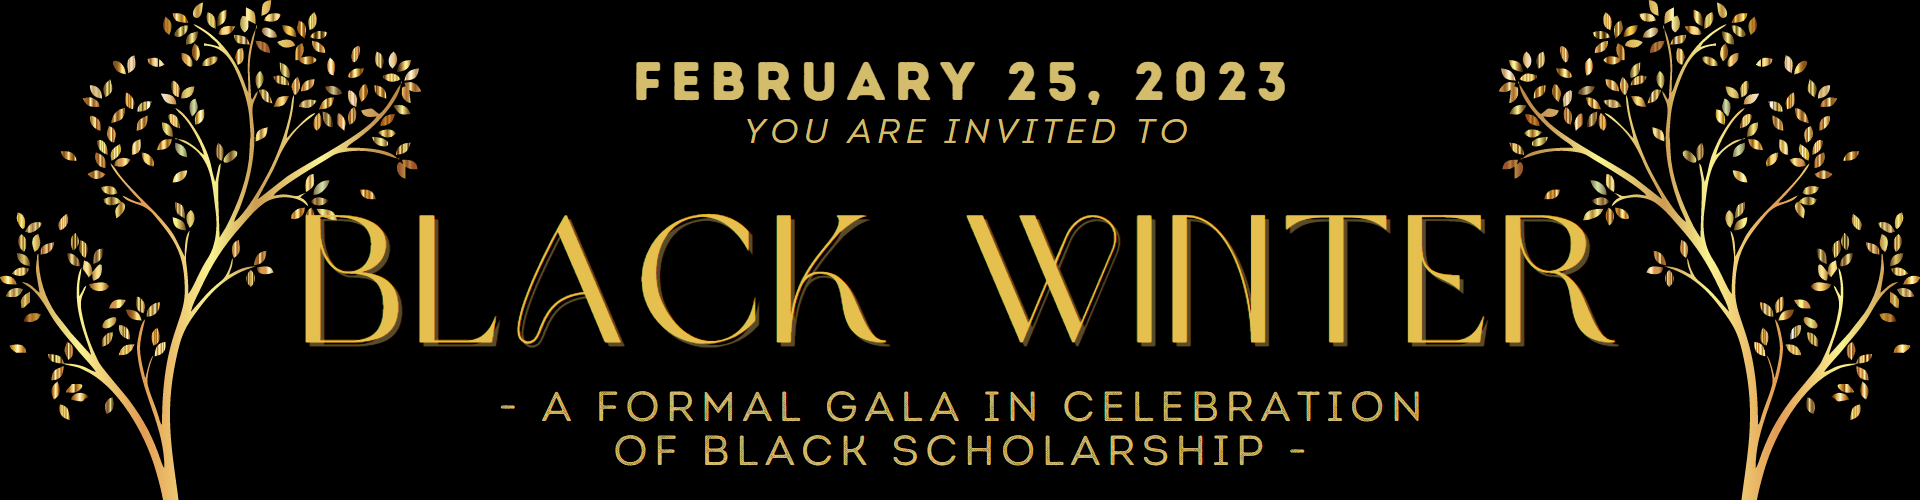 gold trees on a black background. text reads: February 25, 2023, you are invited to Black Winter - A Formal Gala in Celebration of Black Scholarship -